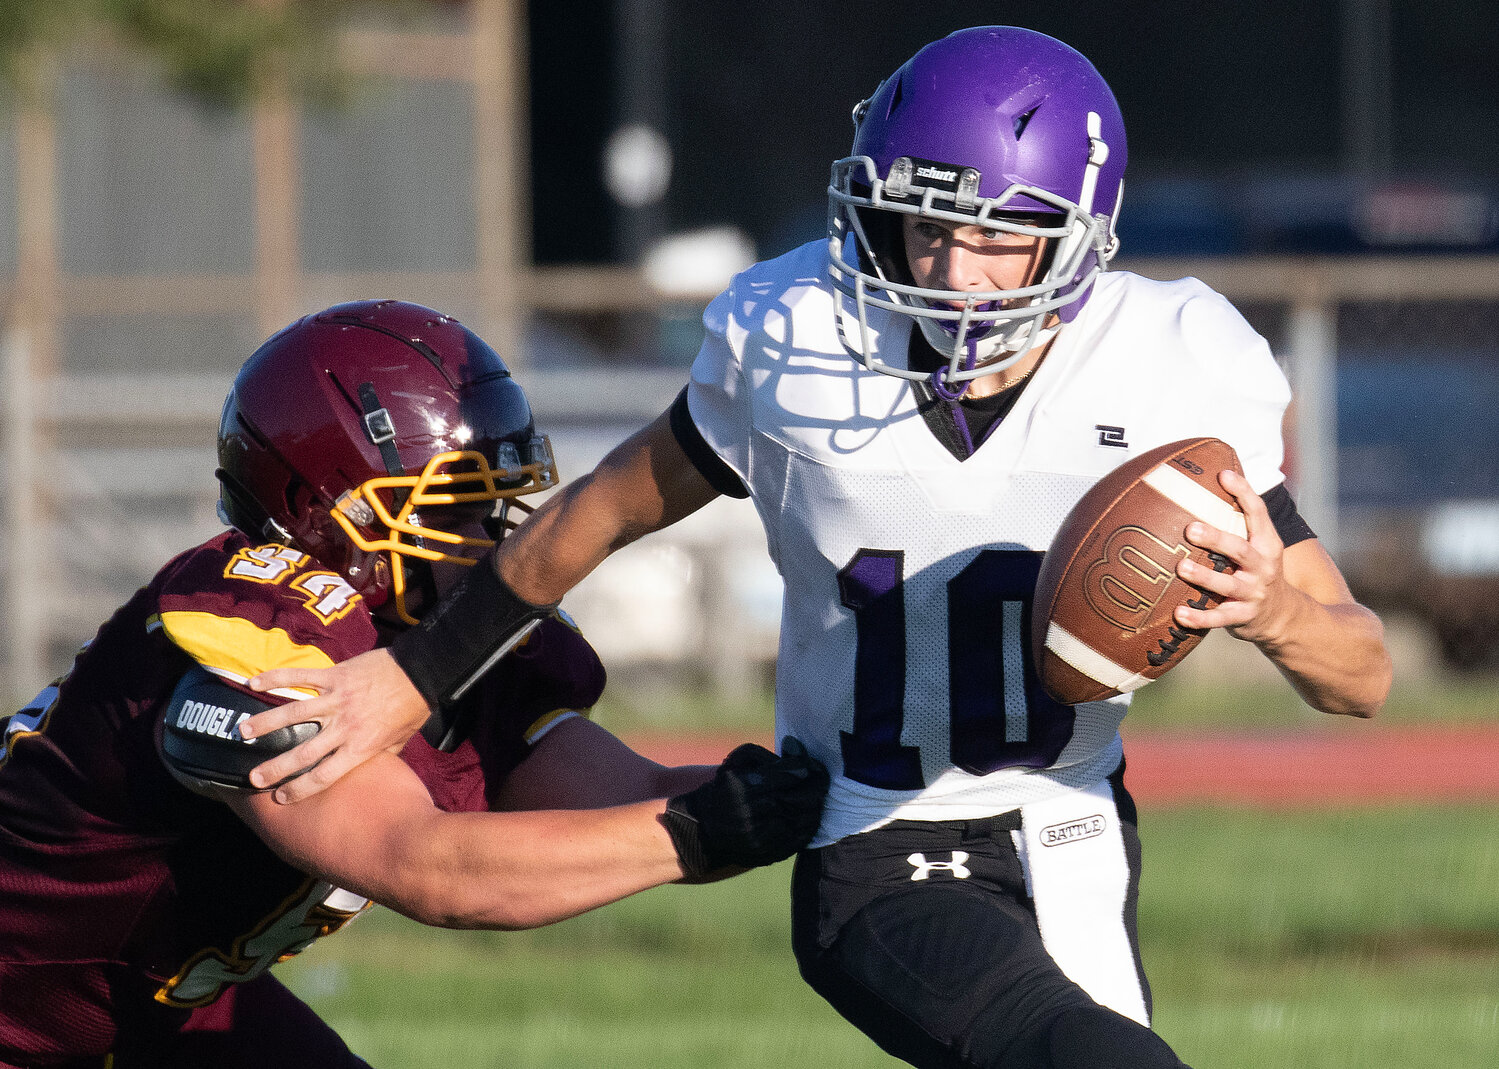 Senior Ethan Quicksall gets after Huskies' quarterback Ethan Martel during the injury fund game.